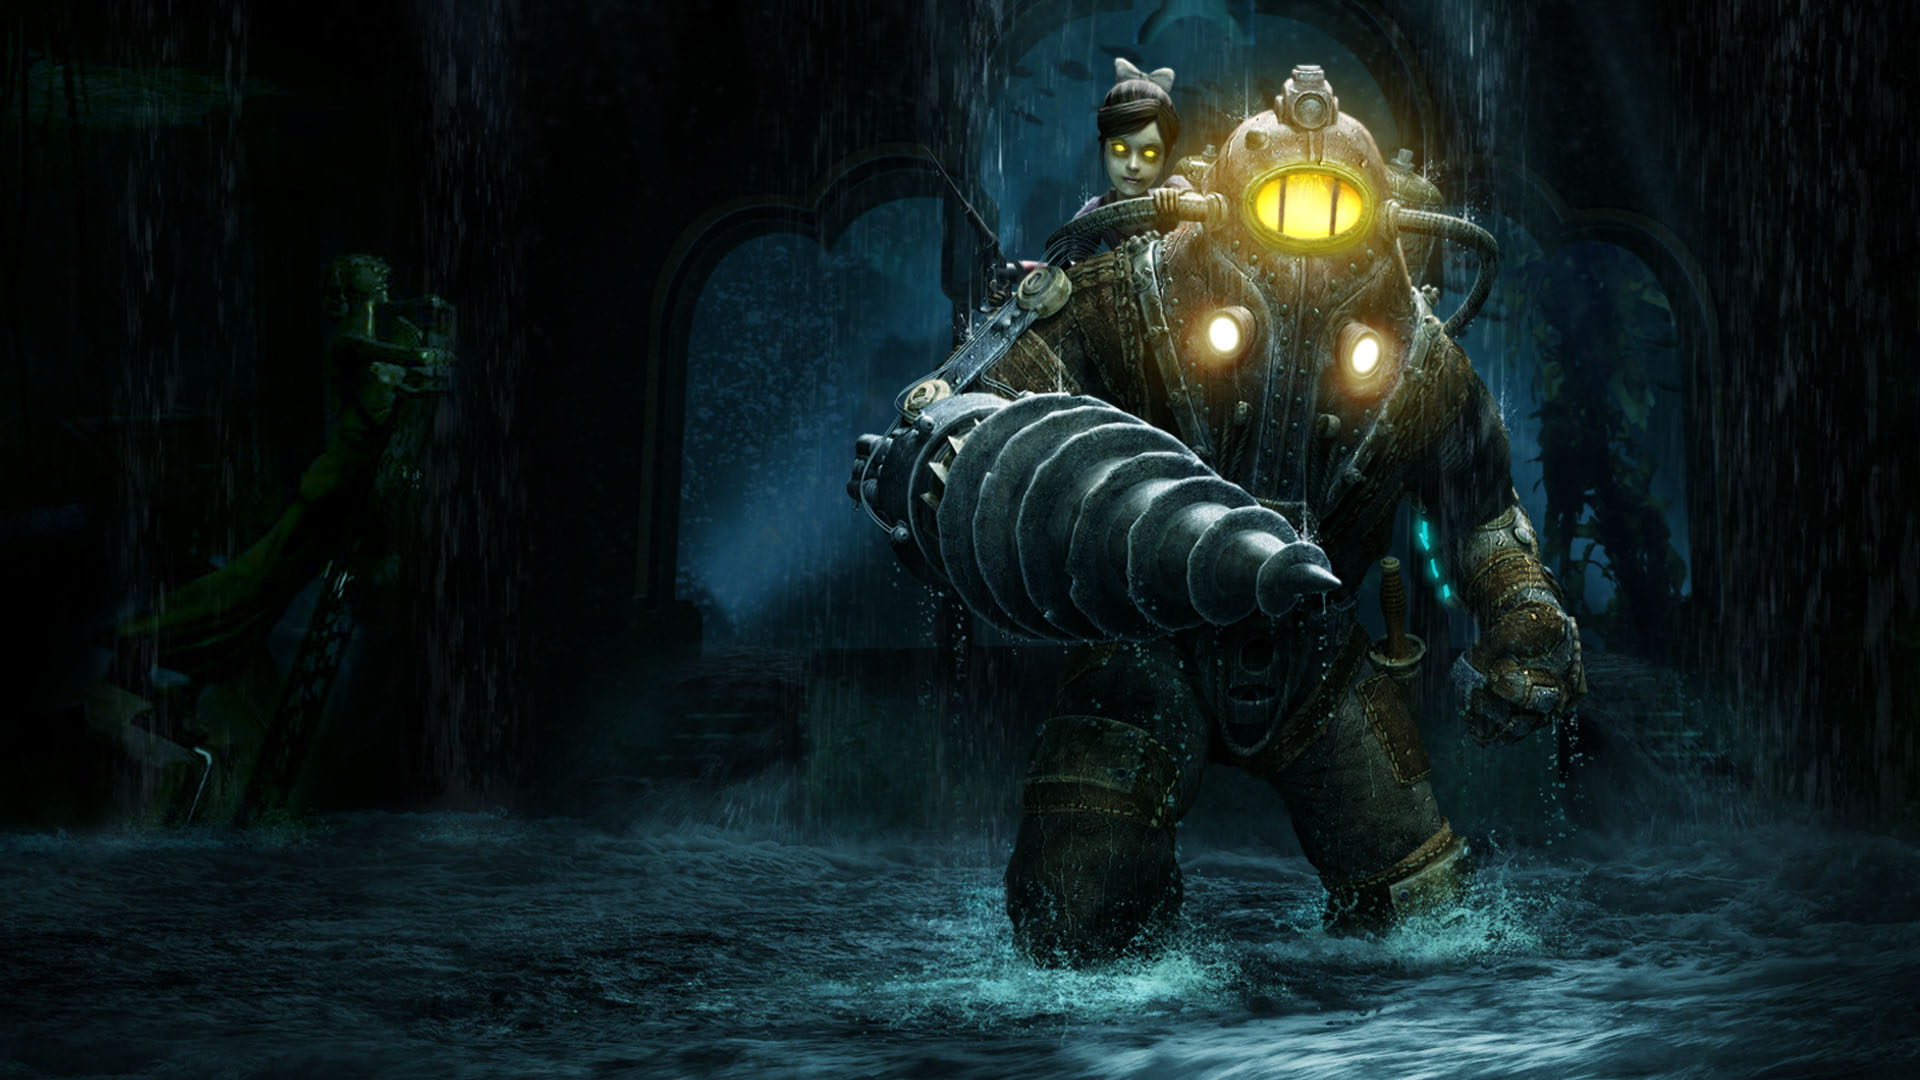  This leaked screenshot may be our first glimpse of BioShock 4, and it sure looks like a BioShock game 